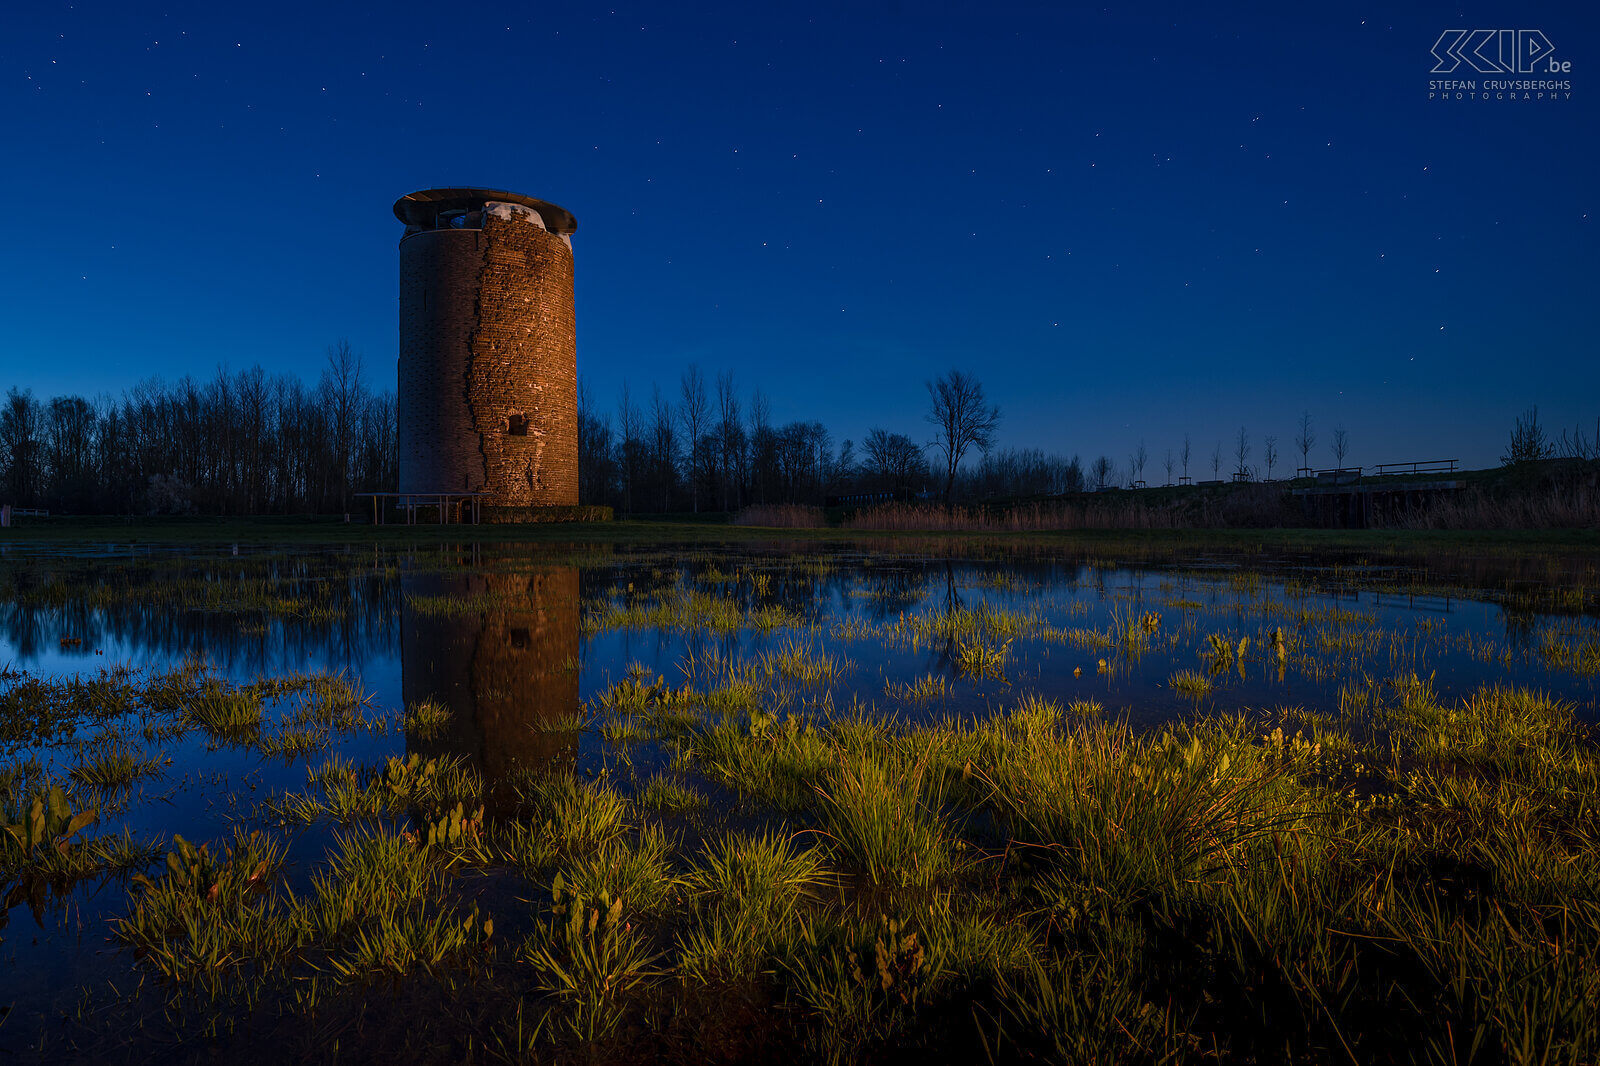 Hageland by night - Maiden's tower in Zichem Blue hour at the Maiden's Tower in my hometown Scherpenheuvel-Zichem. I did some light painting to enlighten the foreground and tower. This tower was built in the 14th century and is located near the Demer river. <br />
 Stefan Cruysberghs